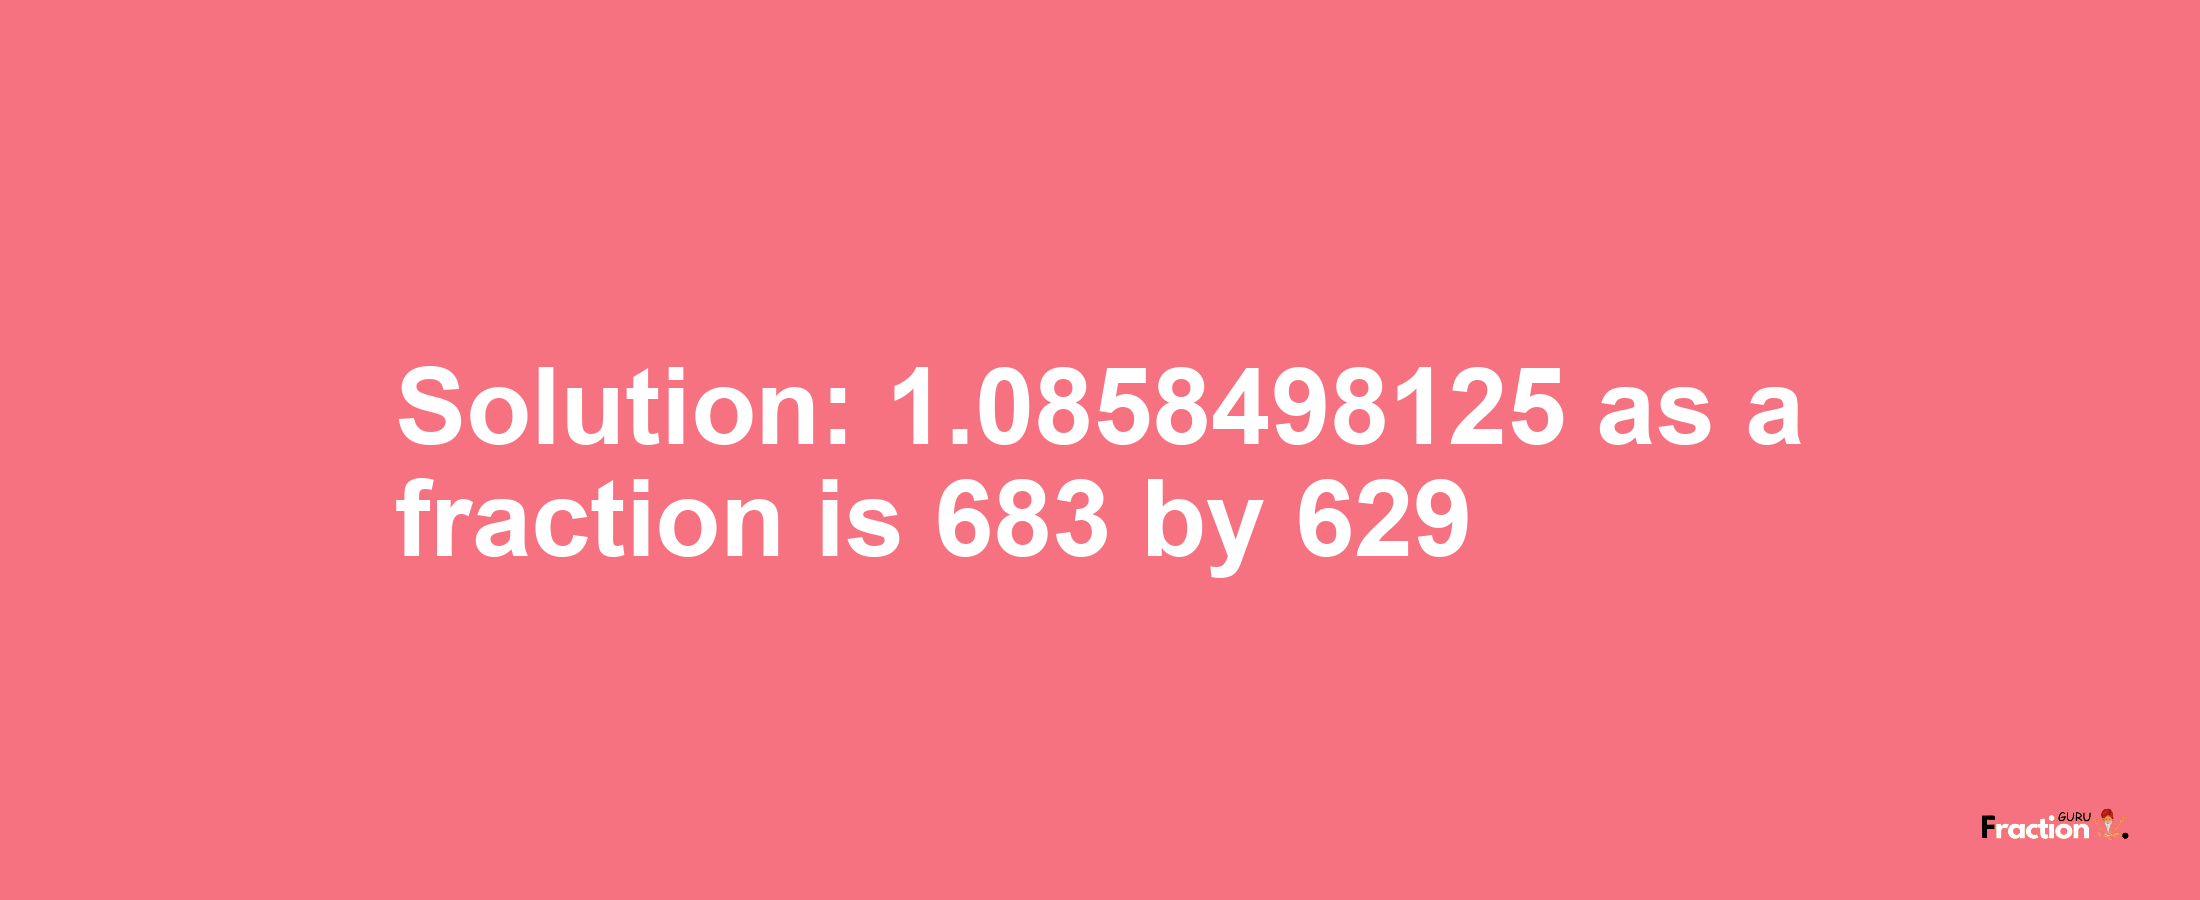 Solution:1.0858498125 as a fraction is 683/629